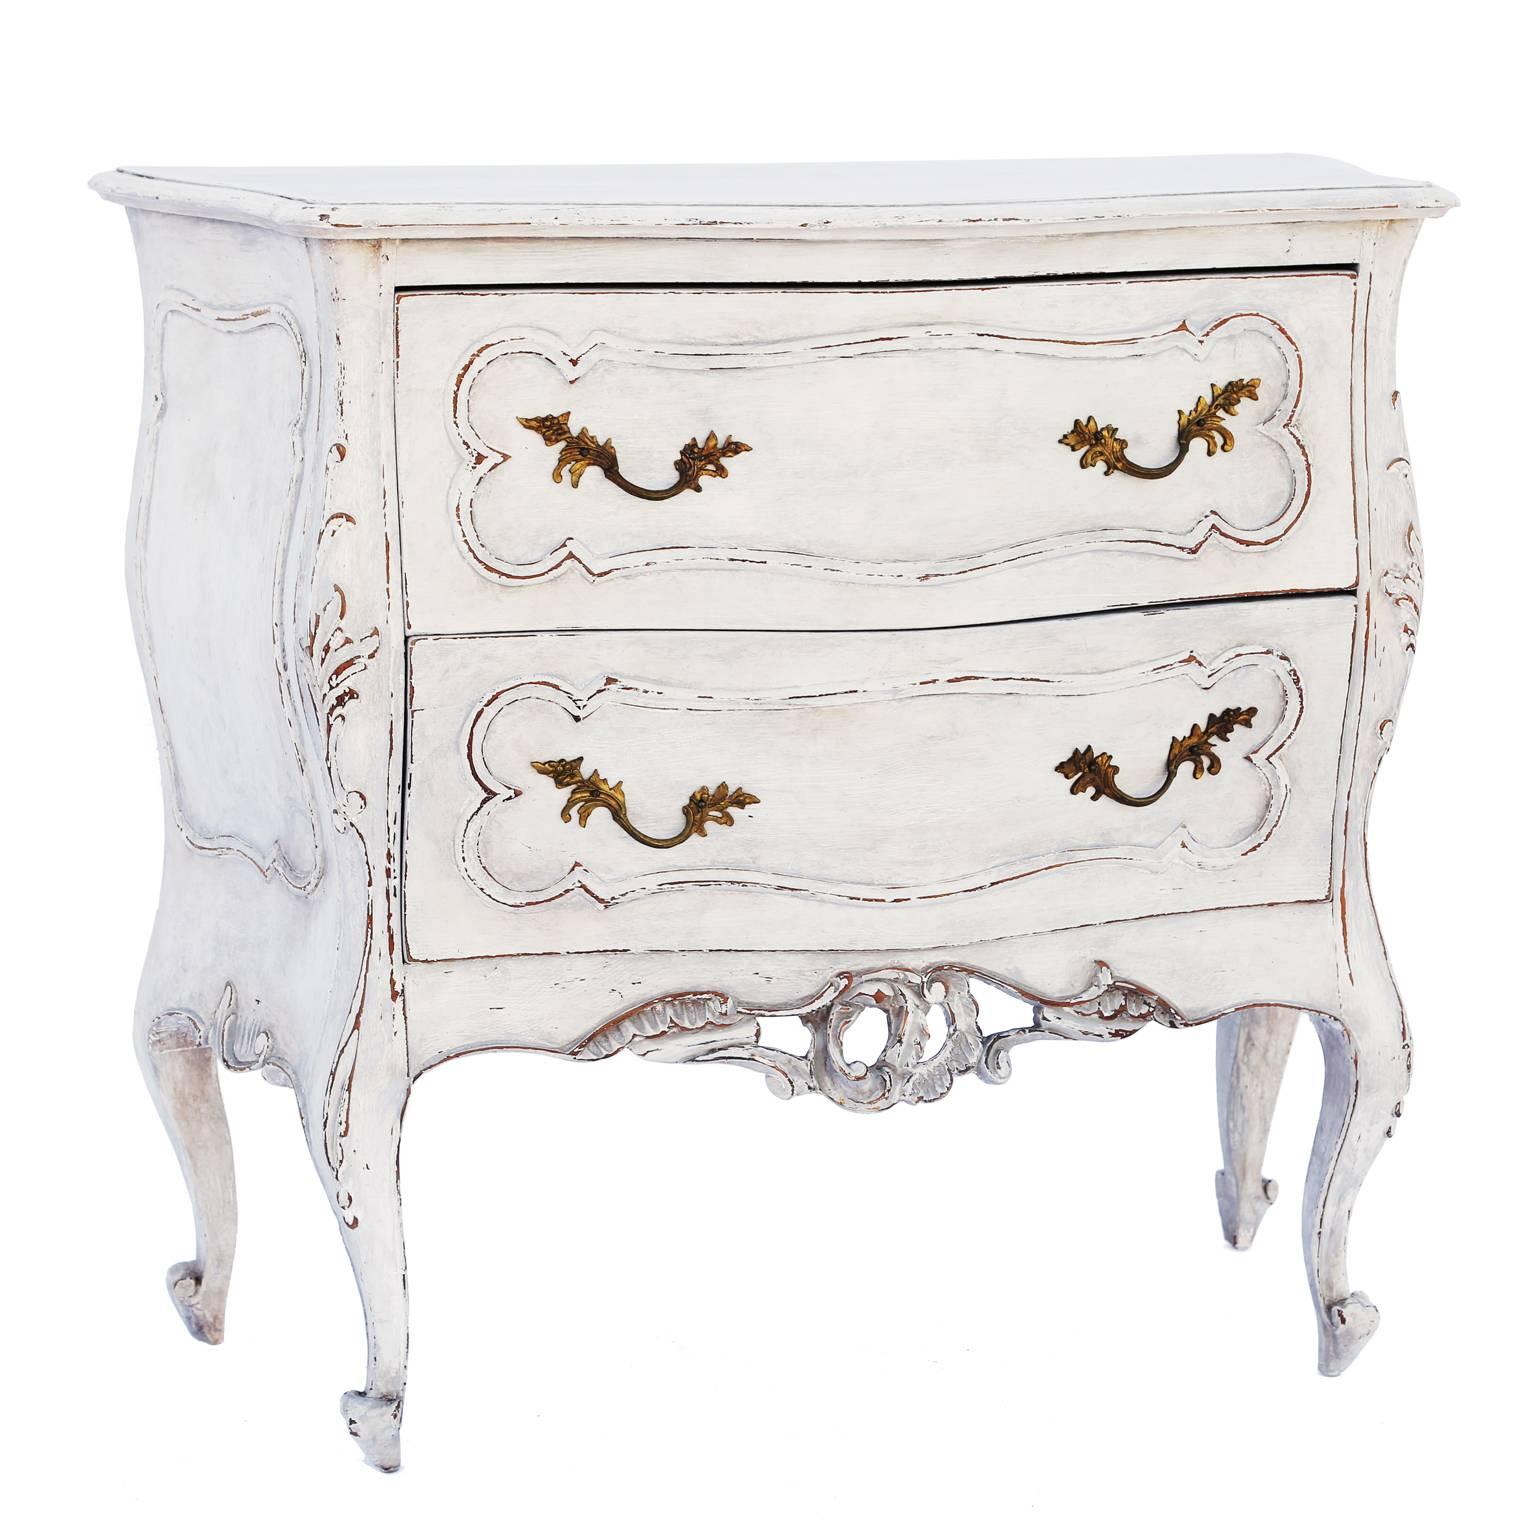 Pair of commodes, in the Rococo style, each with a painted finish showing natural wear, free-form molded top on raised and fielded, double stacked drawers, with brass rocaille handles, bowed sides with its stiles outcarved with foliate vines, raised